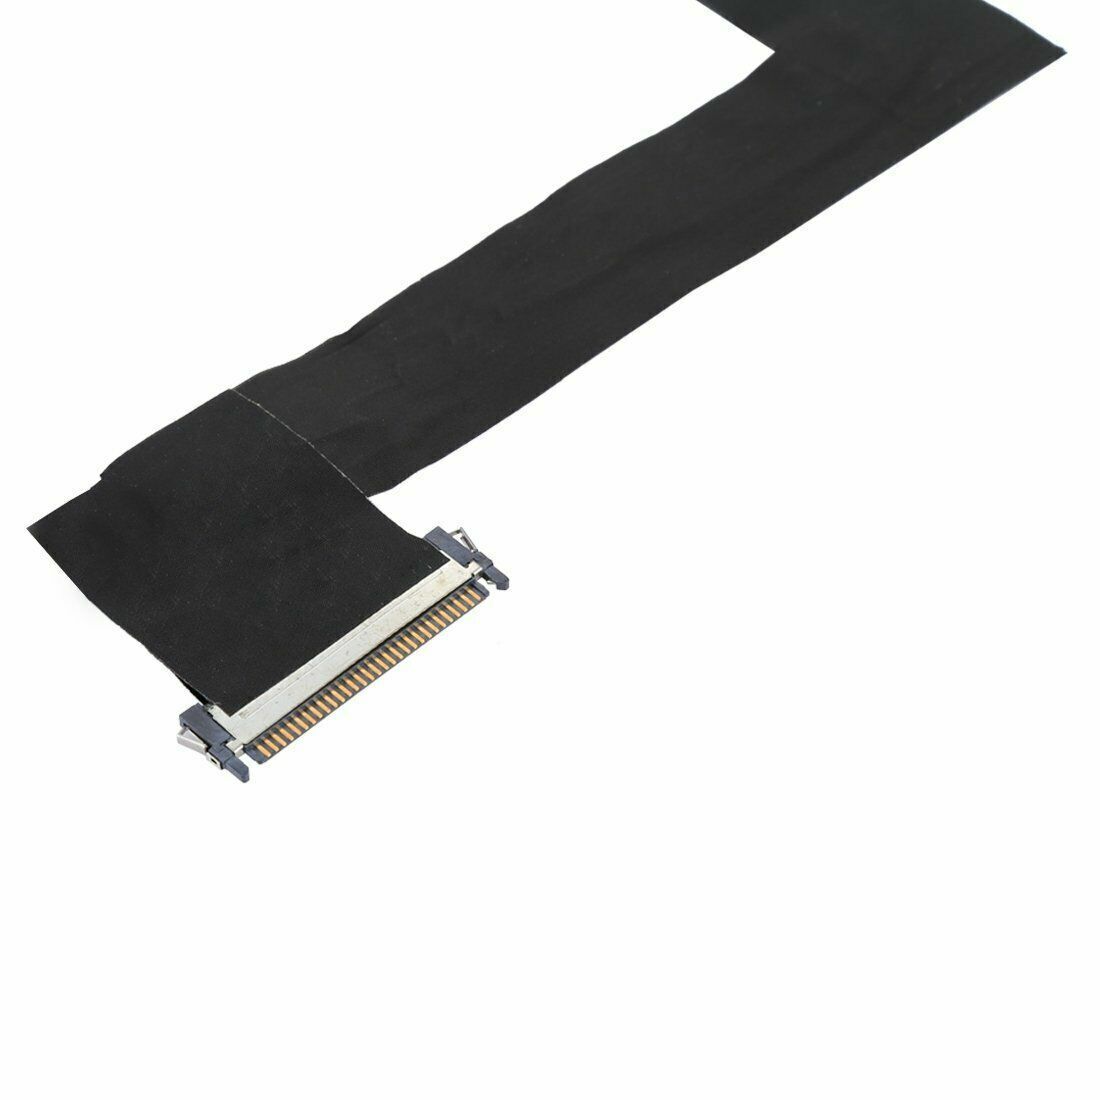 Apple New LCD LED LVDS EDP Display Video Screen Flex Cable iMac 27" A1312 2009-2010 593-1028-A 593-1281-A